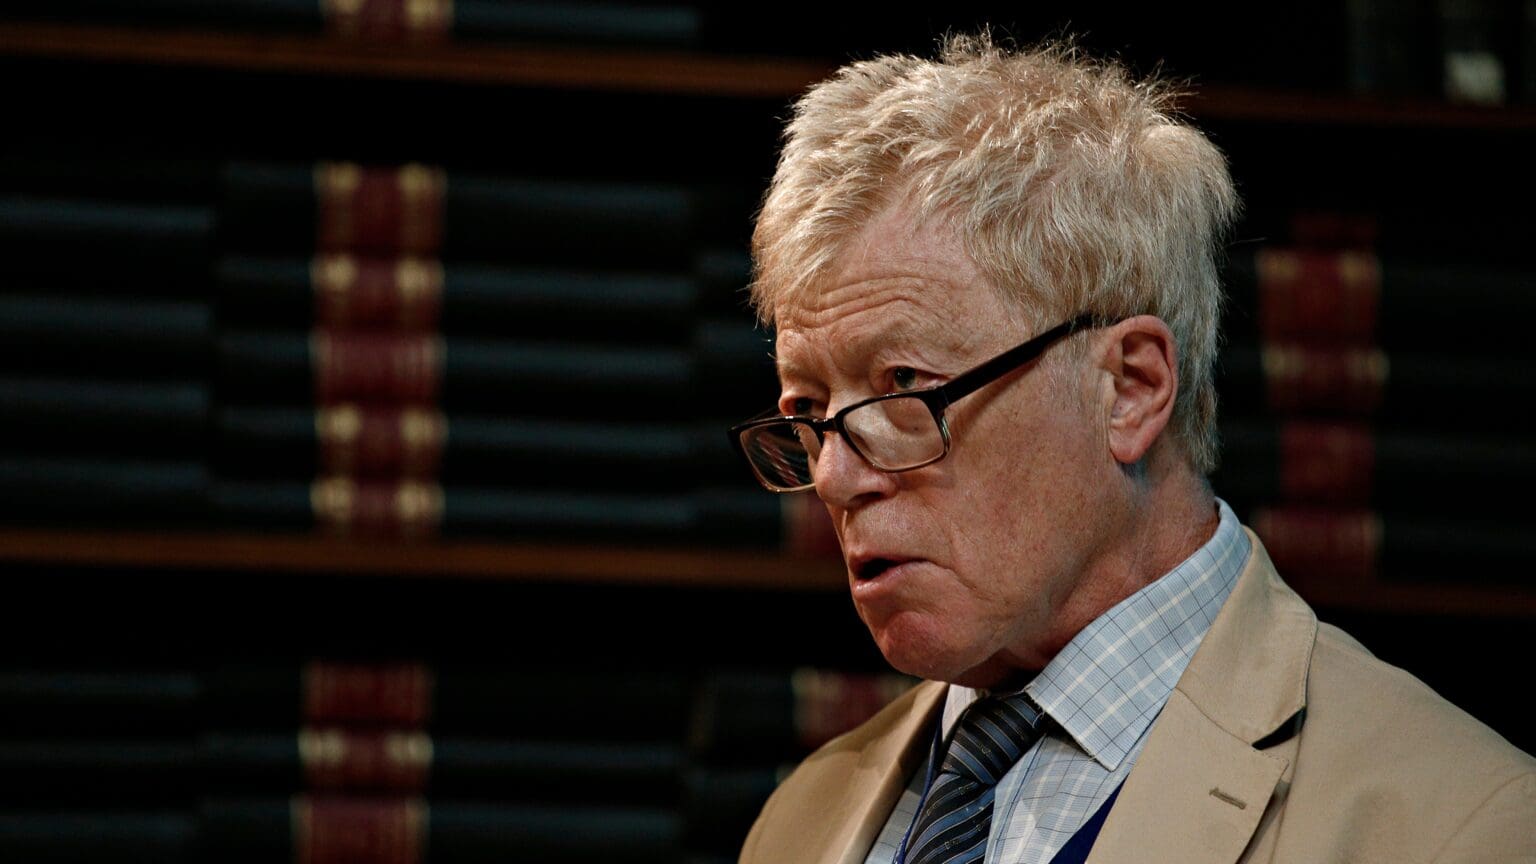 Does Roger Scruton’s Legacy Live On? — Interview with Robert Grant